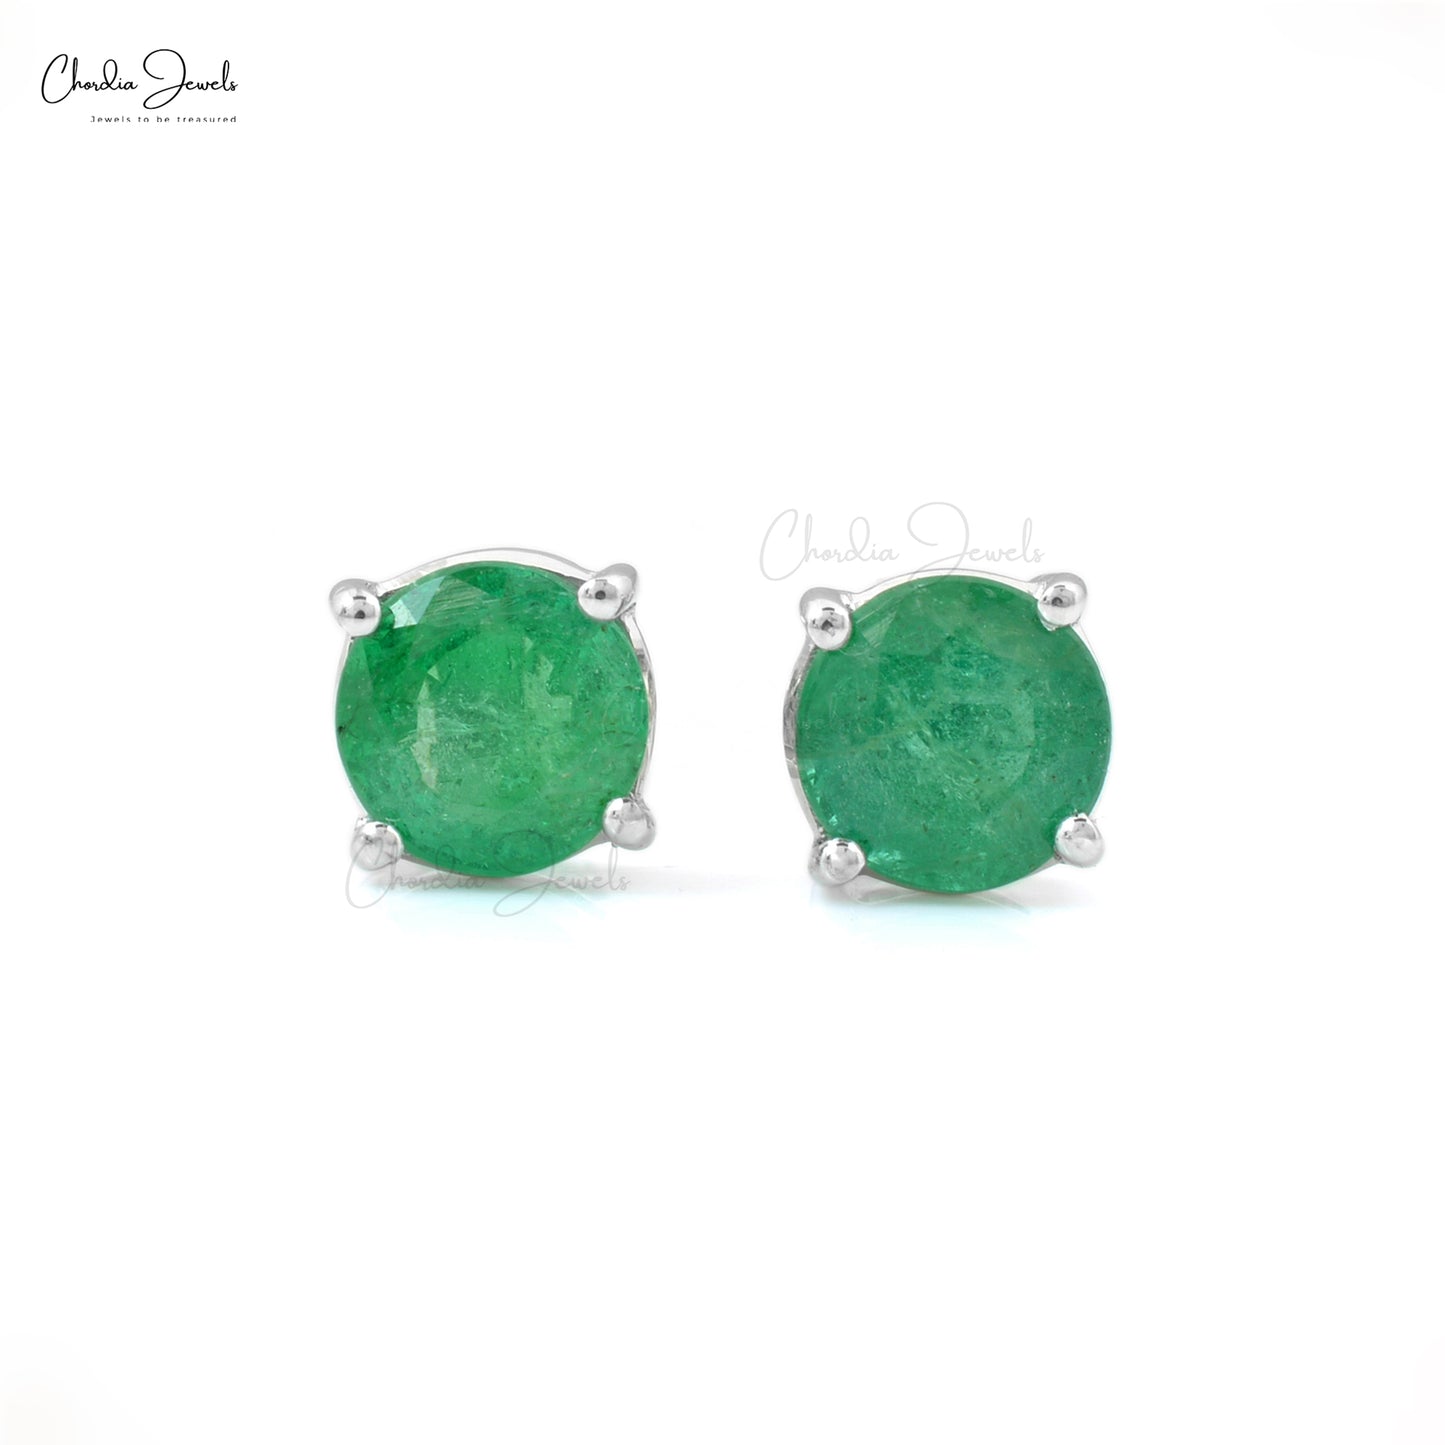 Solitaire 2.10ct Round Emerald Push Back Studs in 14k Solid White Gold